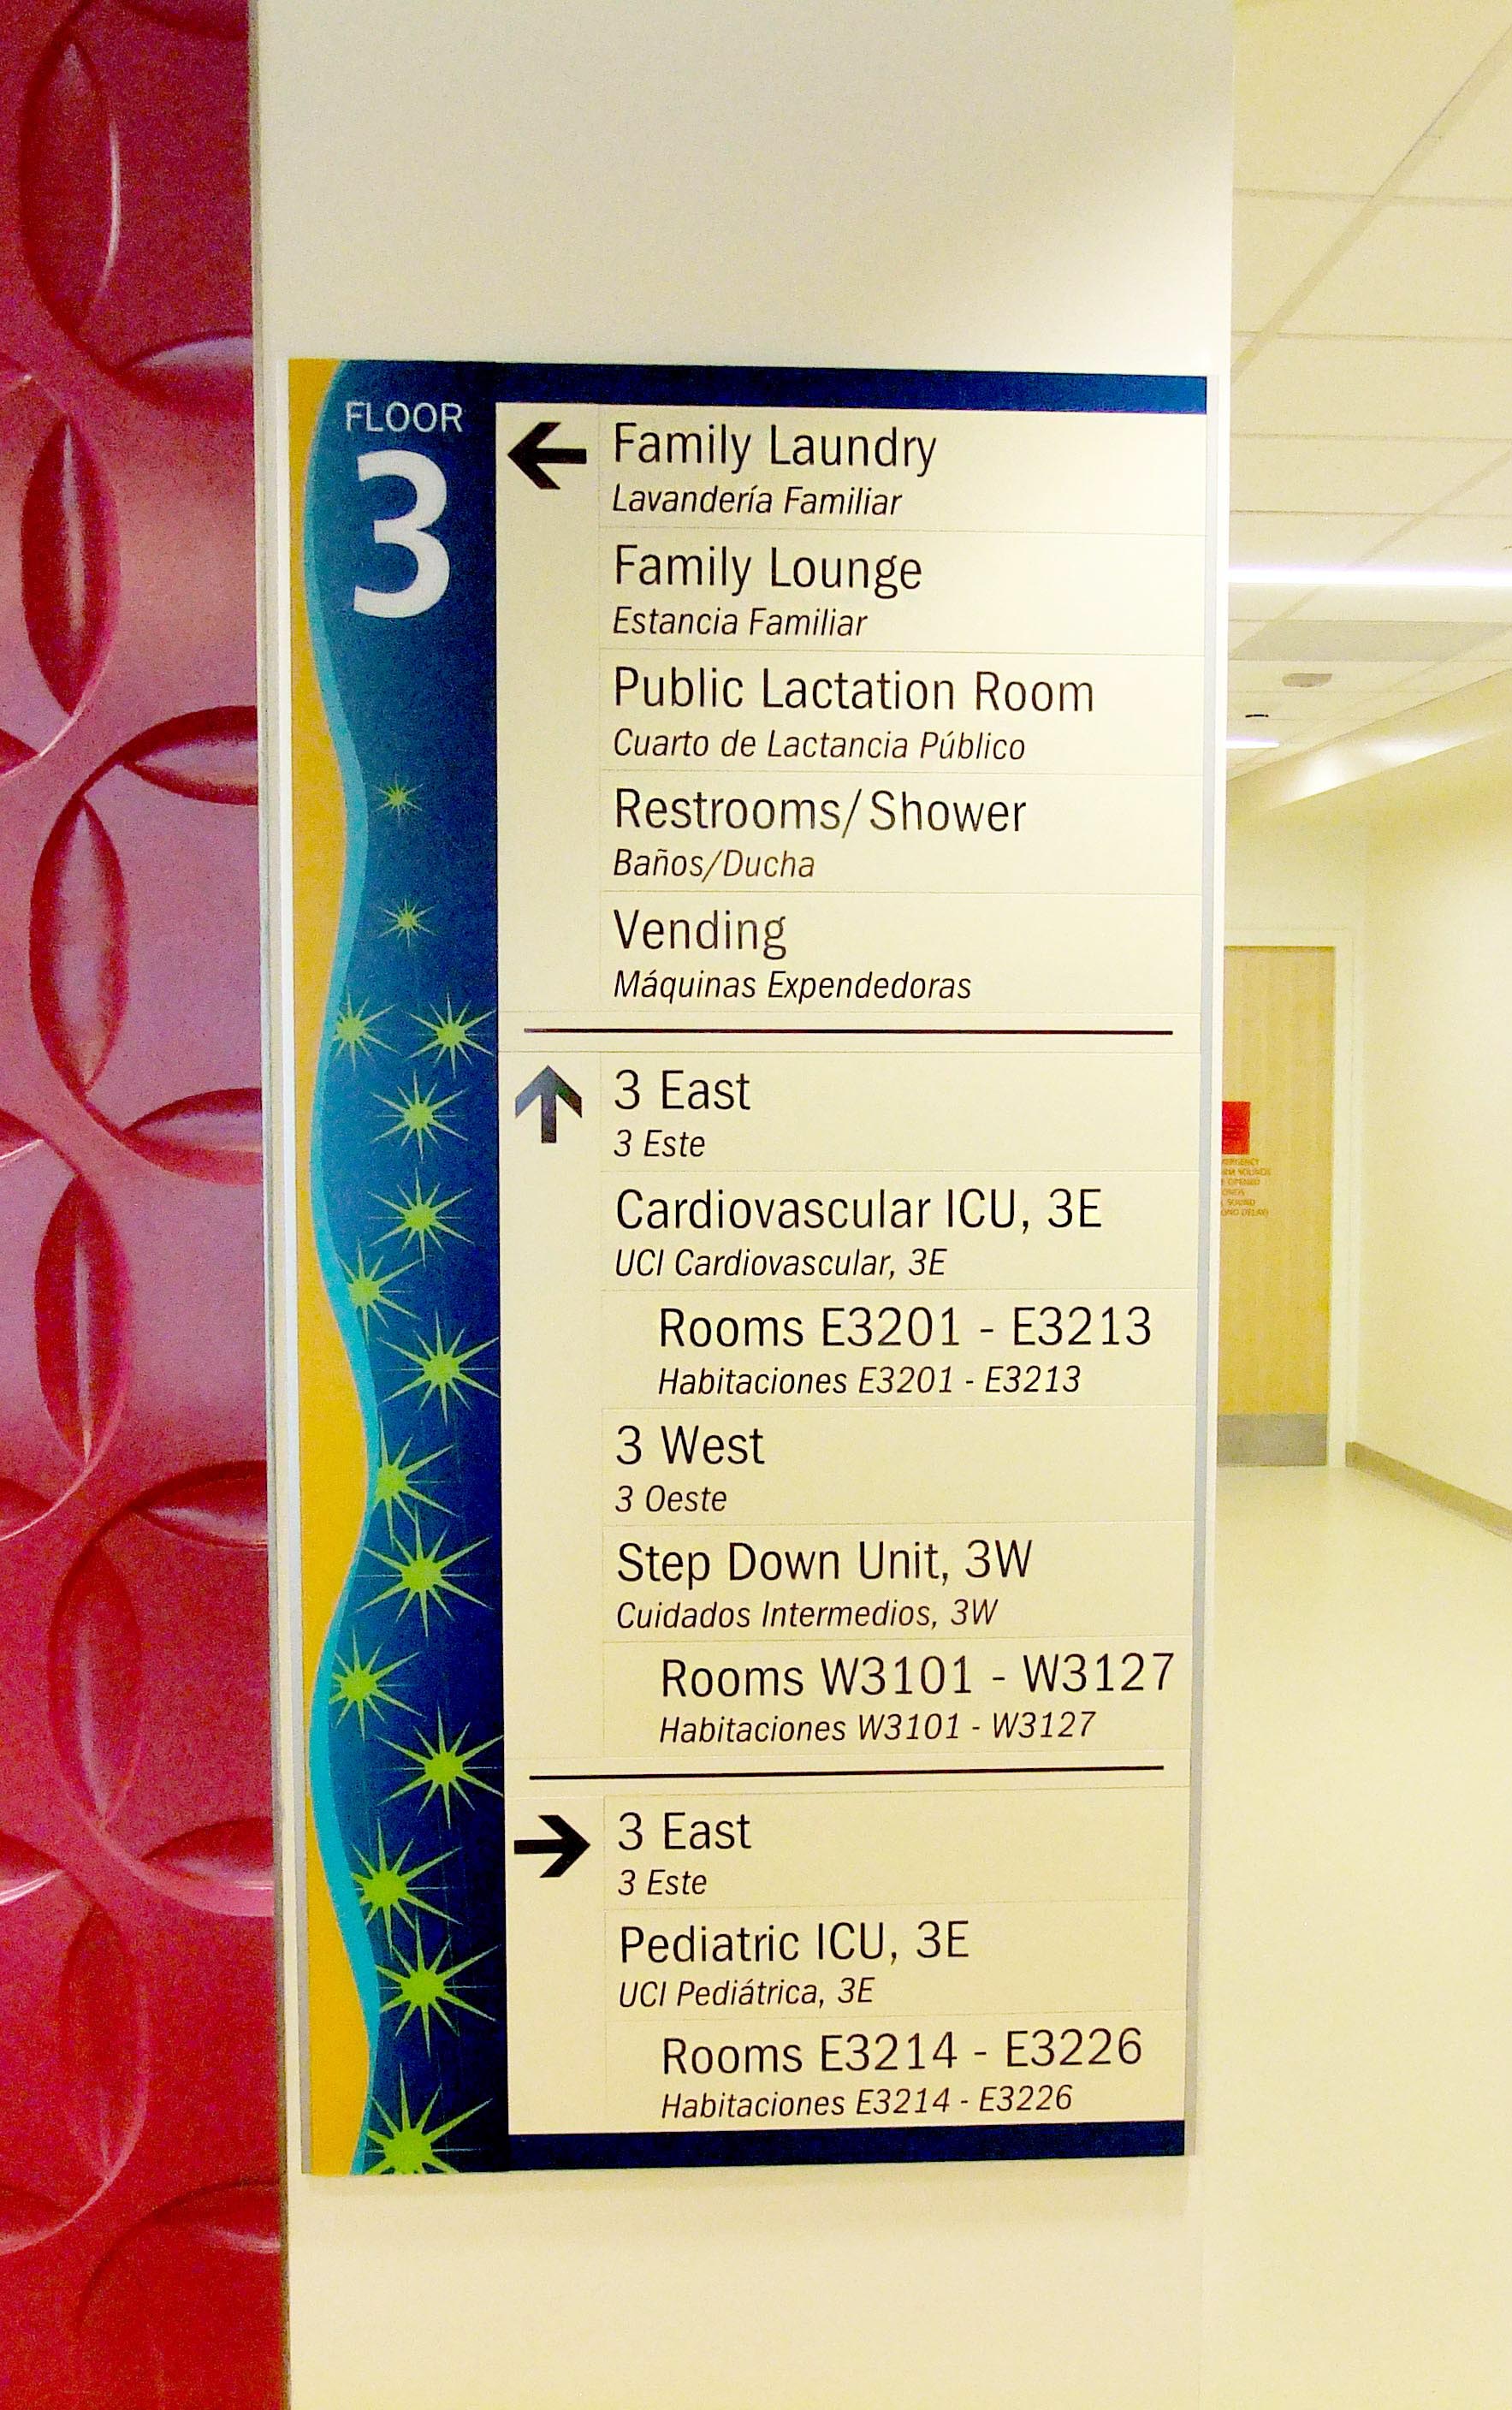 Hospital signs - different languages.jpg